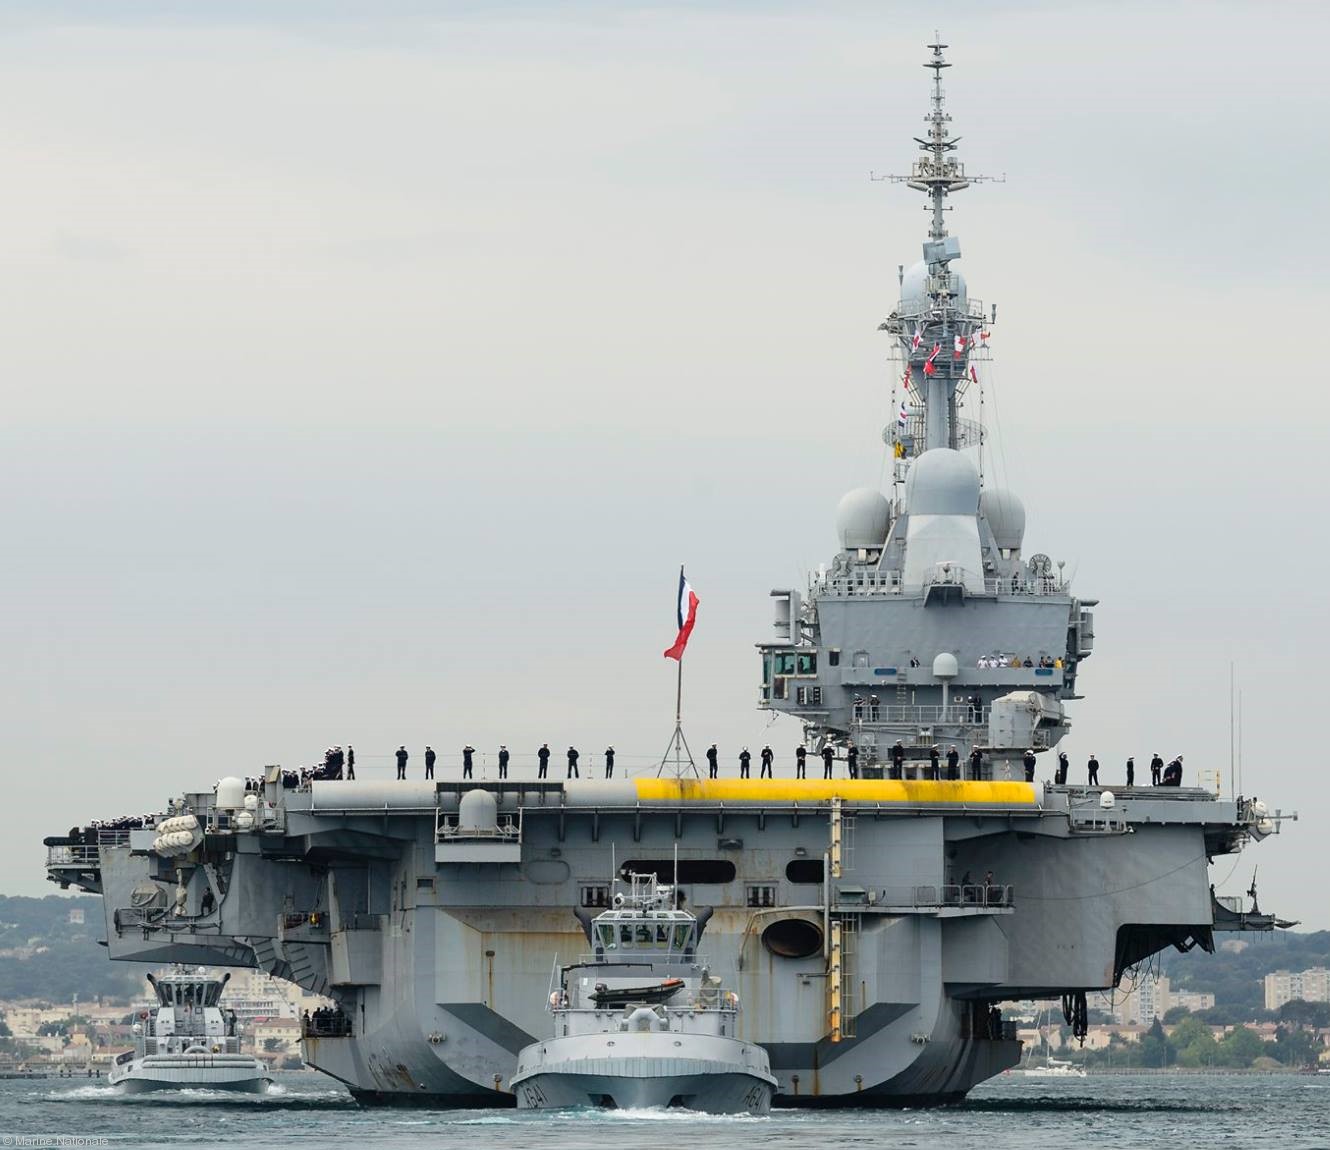  r-91 fs charles de gaulle aircraft carrier french navy 33